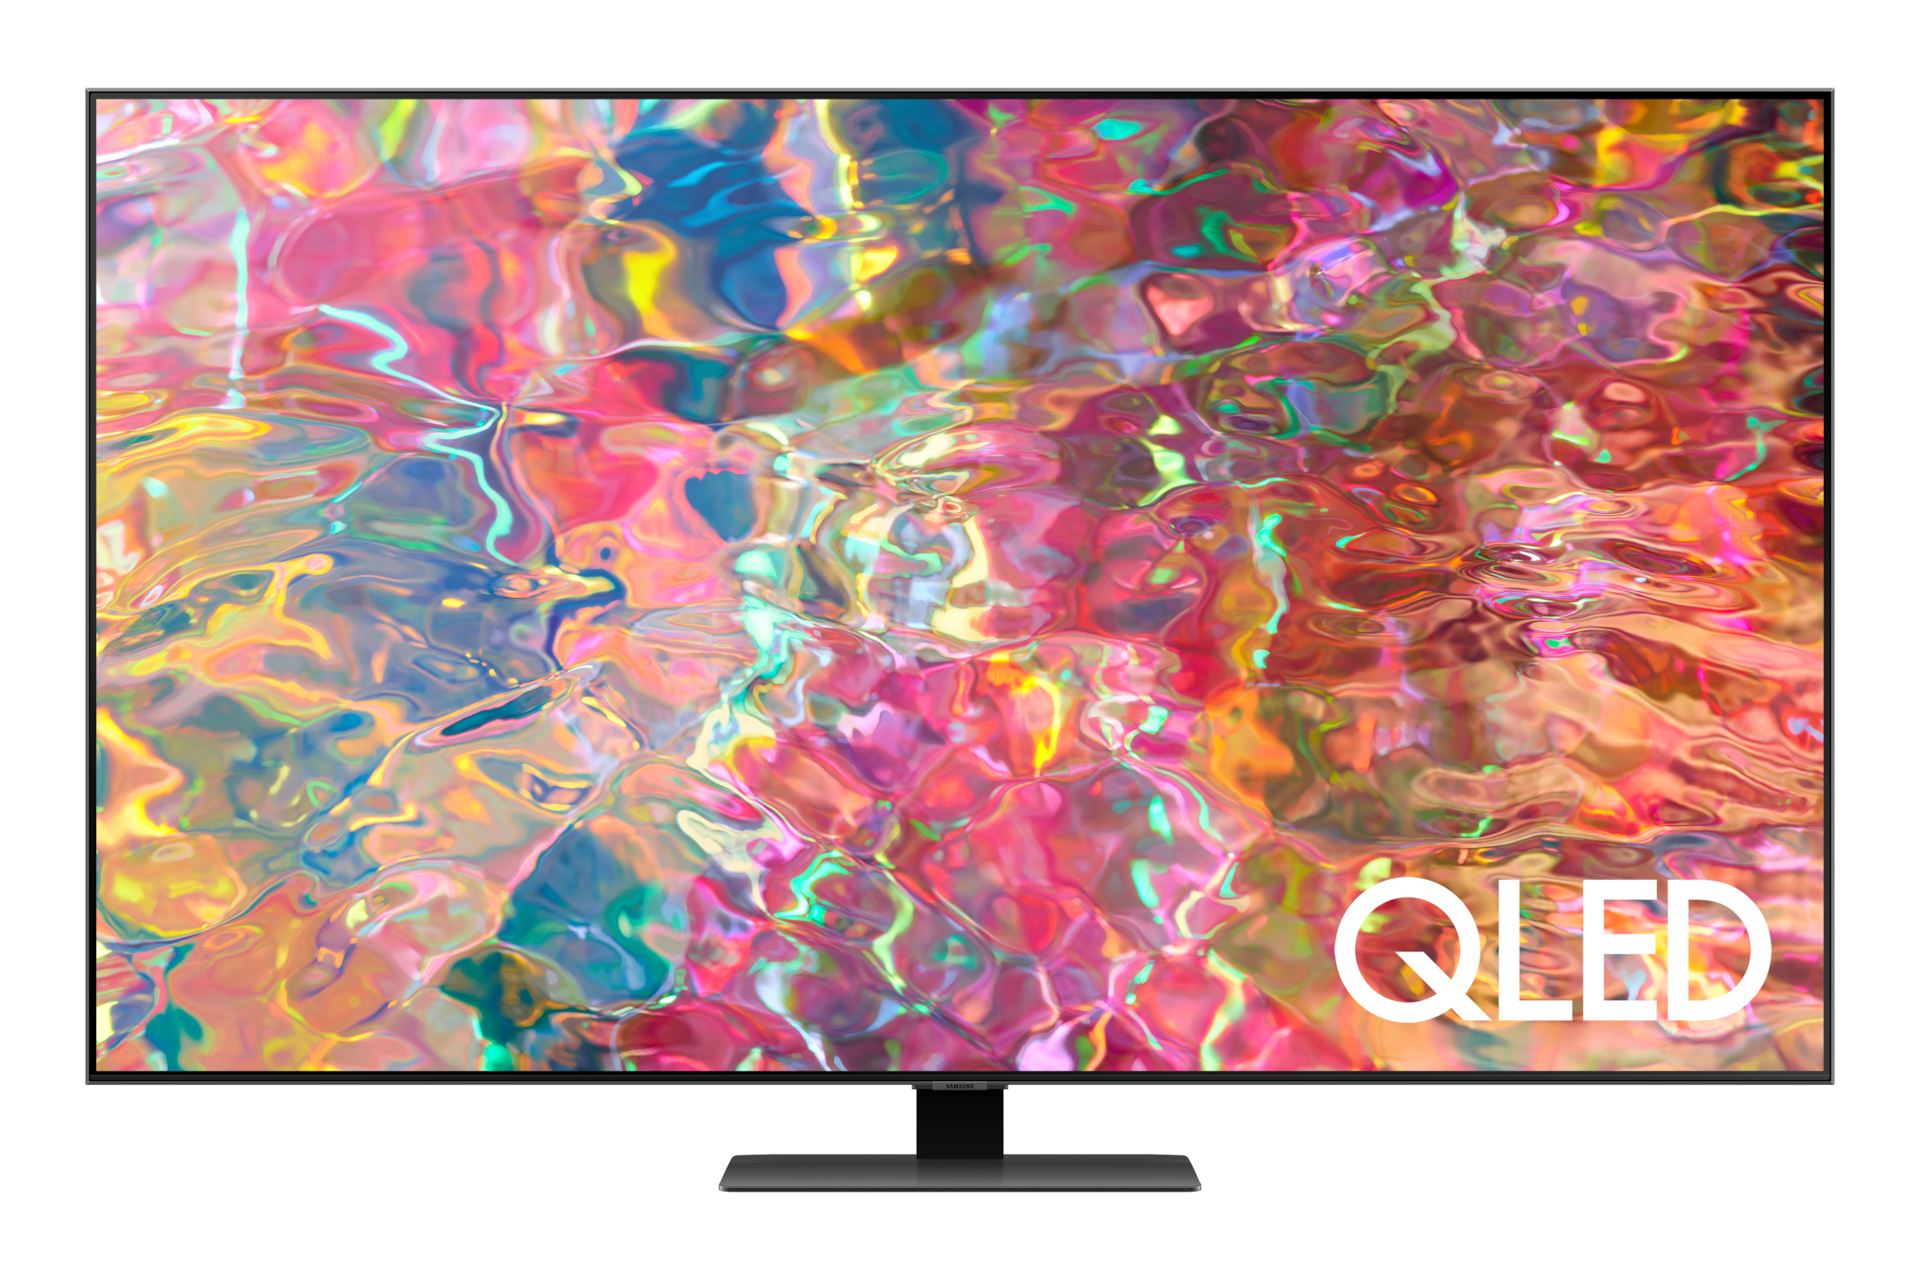 Samsung QLED 4K Q80B is powered by Tizen OS with features such as screen mirroring, WiFi Direct, SmartThings, Smart Hub, and Voice Assistant. Check out the price and buy now.